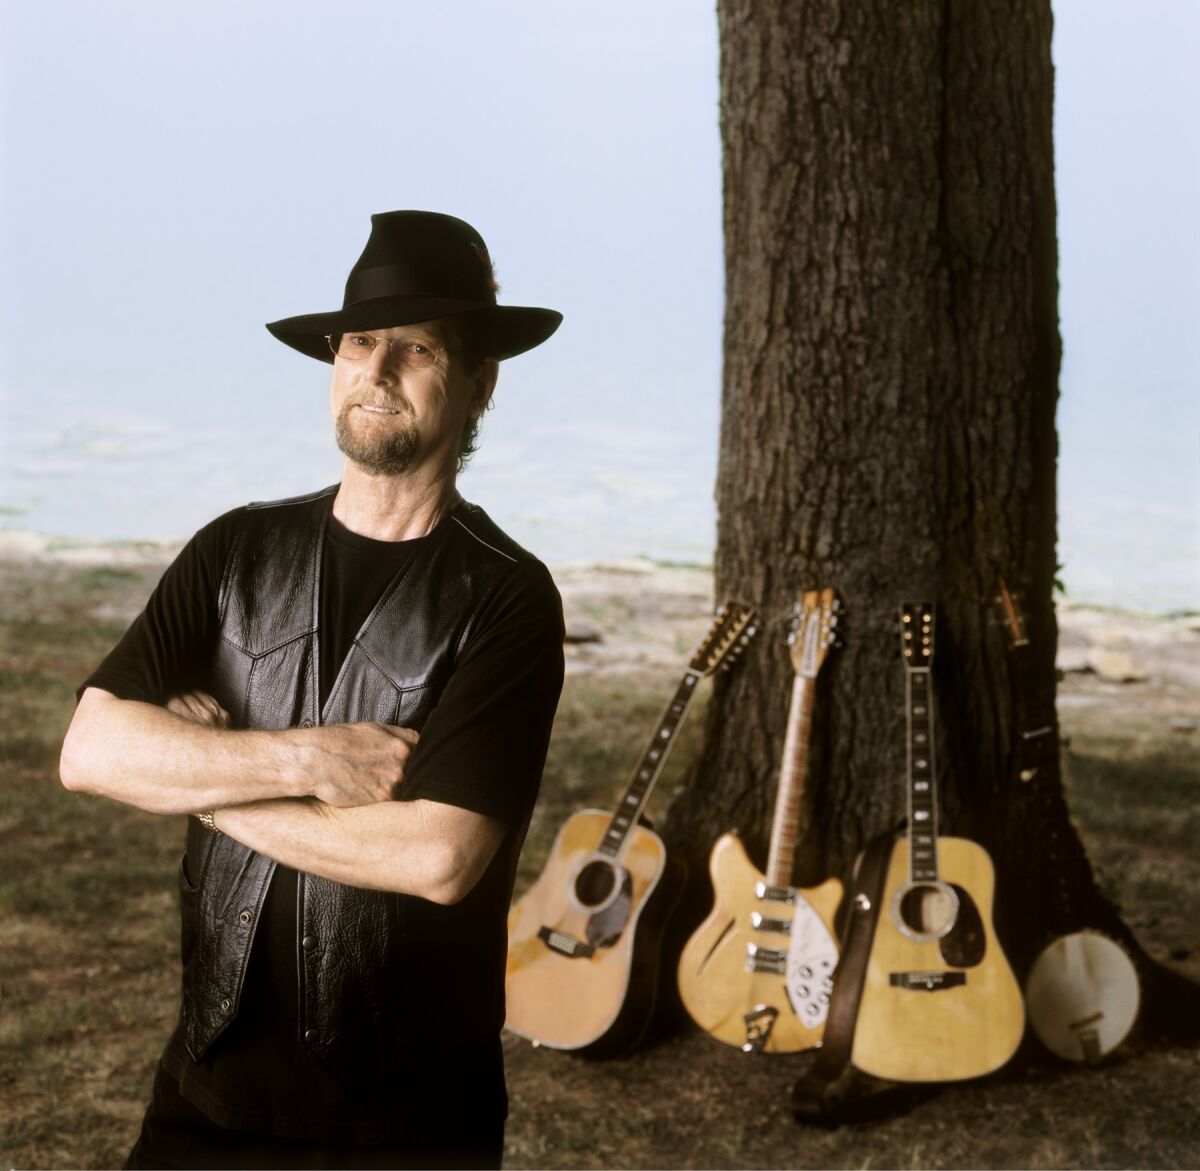 Roger McGuinn was inducted into the Rock and Roll Hall of Fame in 1991 